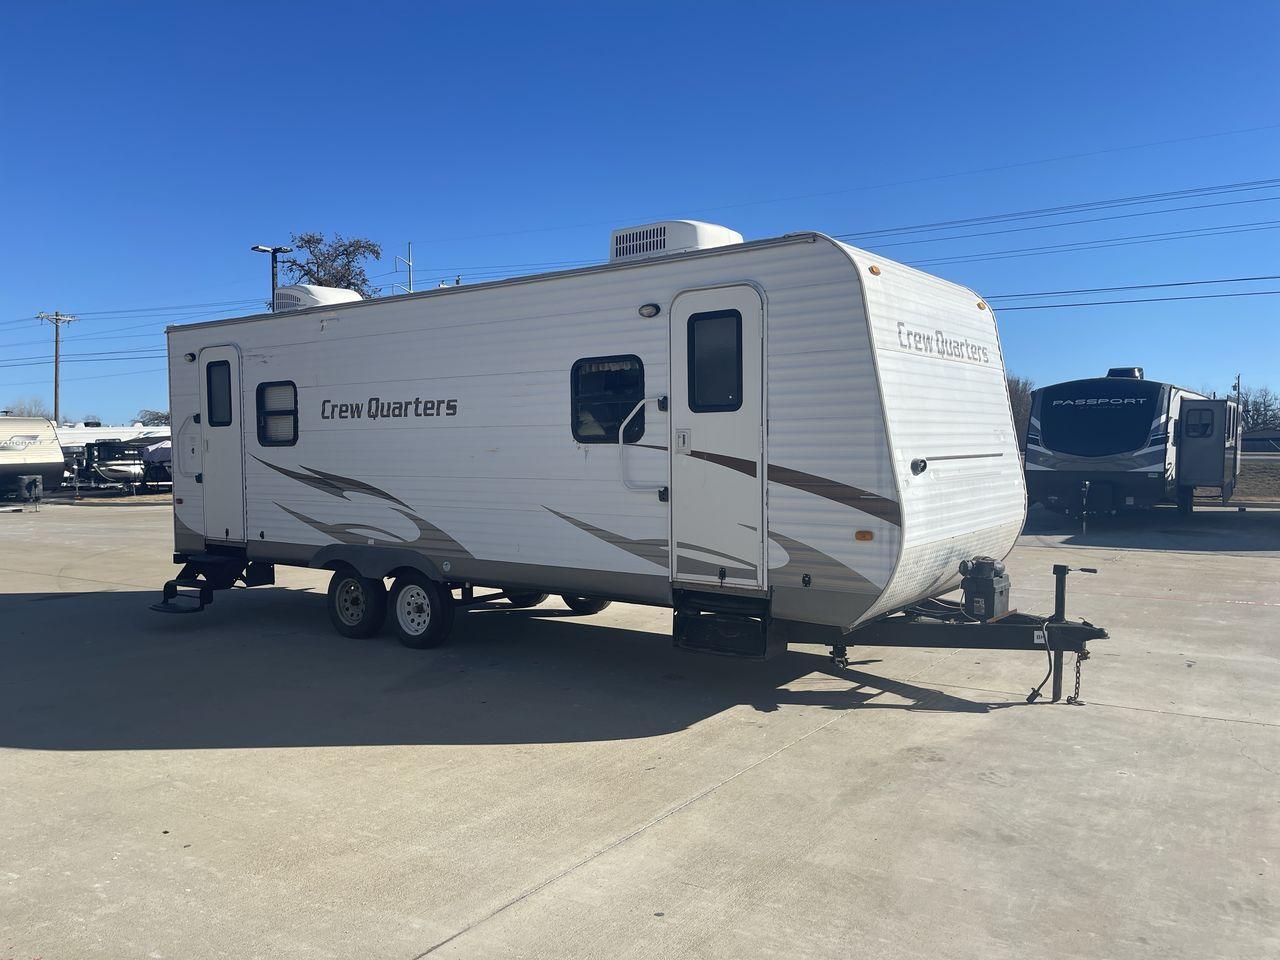 2010 WHITE FOREST RIVER CREW QUARTERS T24-2 - (4X4TWDZ21AR) , Dry Weight: 5,275 lbs | Gross Weight: 7,713 lbs | Slides: 0 transmission, located at 4319 N Main St, Cleburne, TX, 76033, (817) 678-5133, 32.385960, -97.391212 - The 2010 Crew Quarters T24-2 is a cute and cozy travel trailer that comes with lovely features that you would absolutely adore in a camper. It features a corner bunk bed with a nice window on the bottom bunk. It has a mini fridge, a microwave, and a solid surface counter space. A tall double-door ca - Photo #18